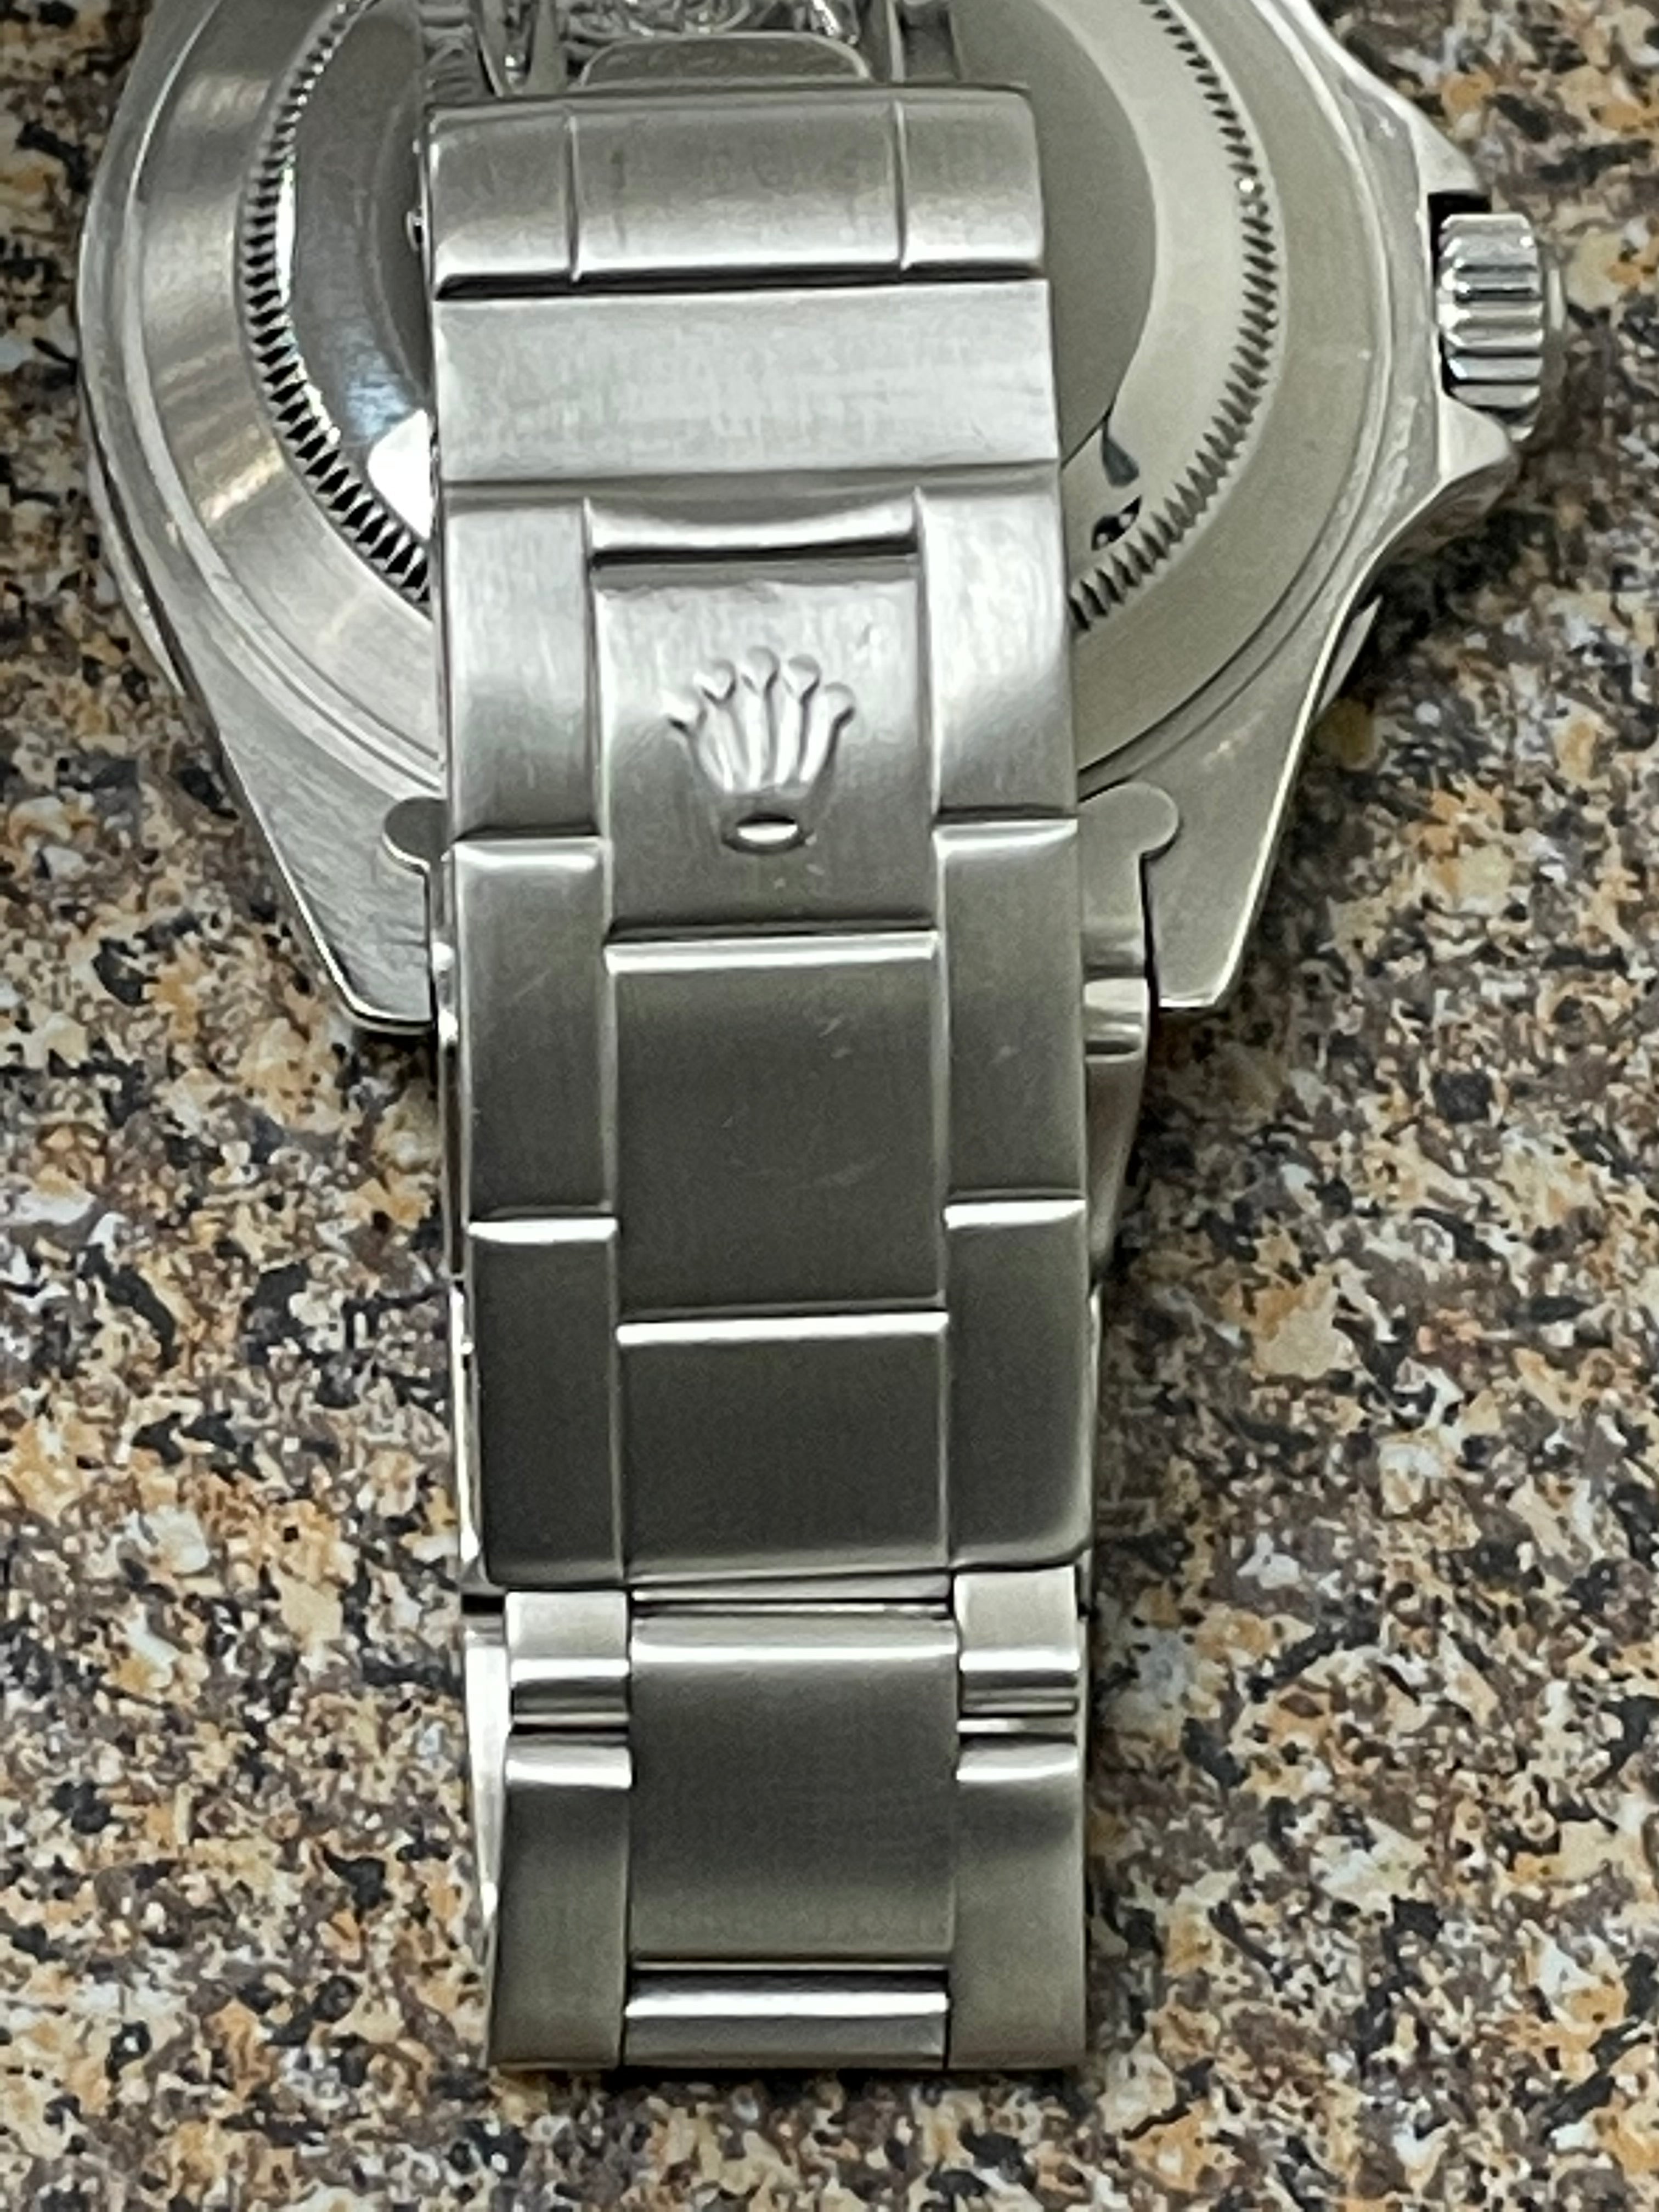 Pre-Owned Submariner Stainless Steel